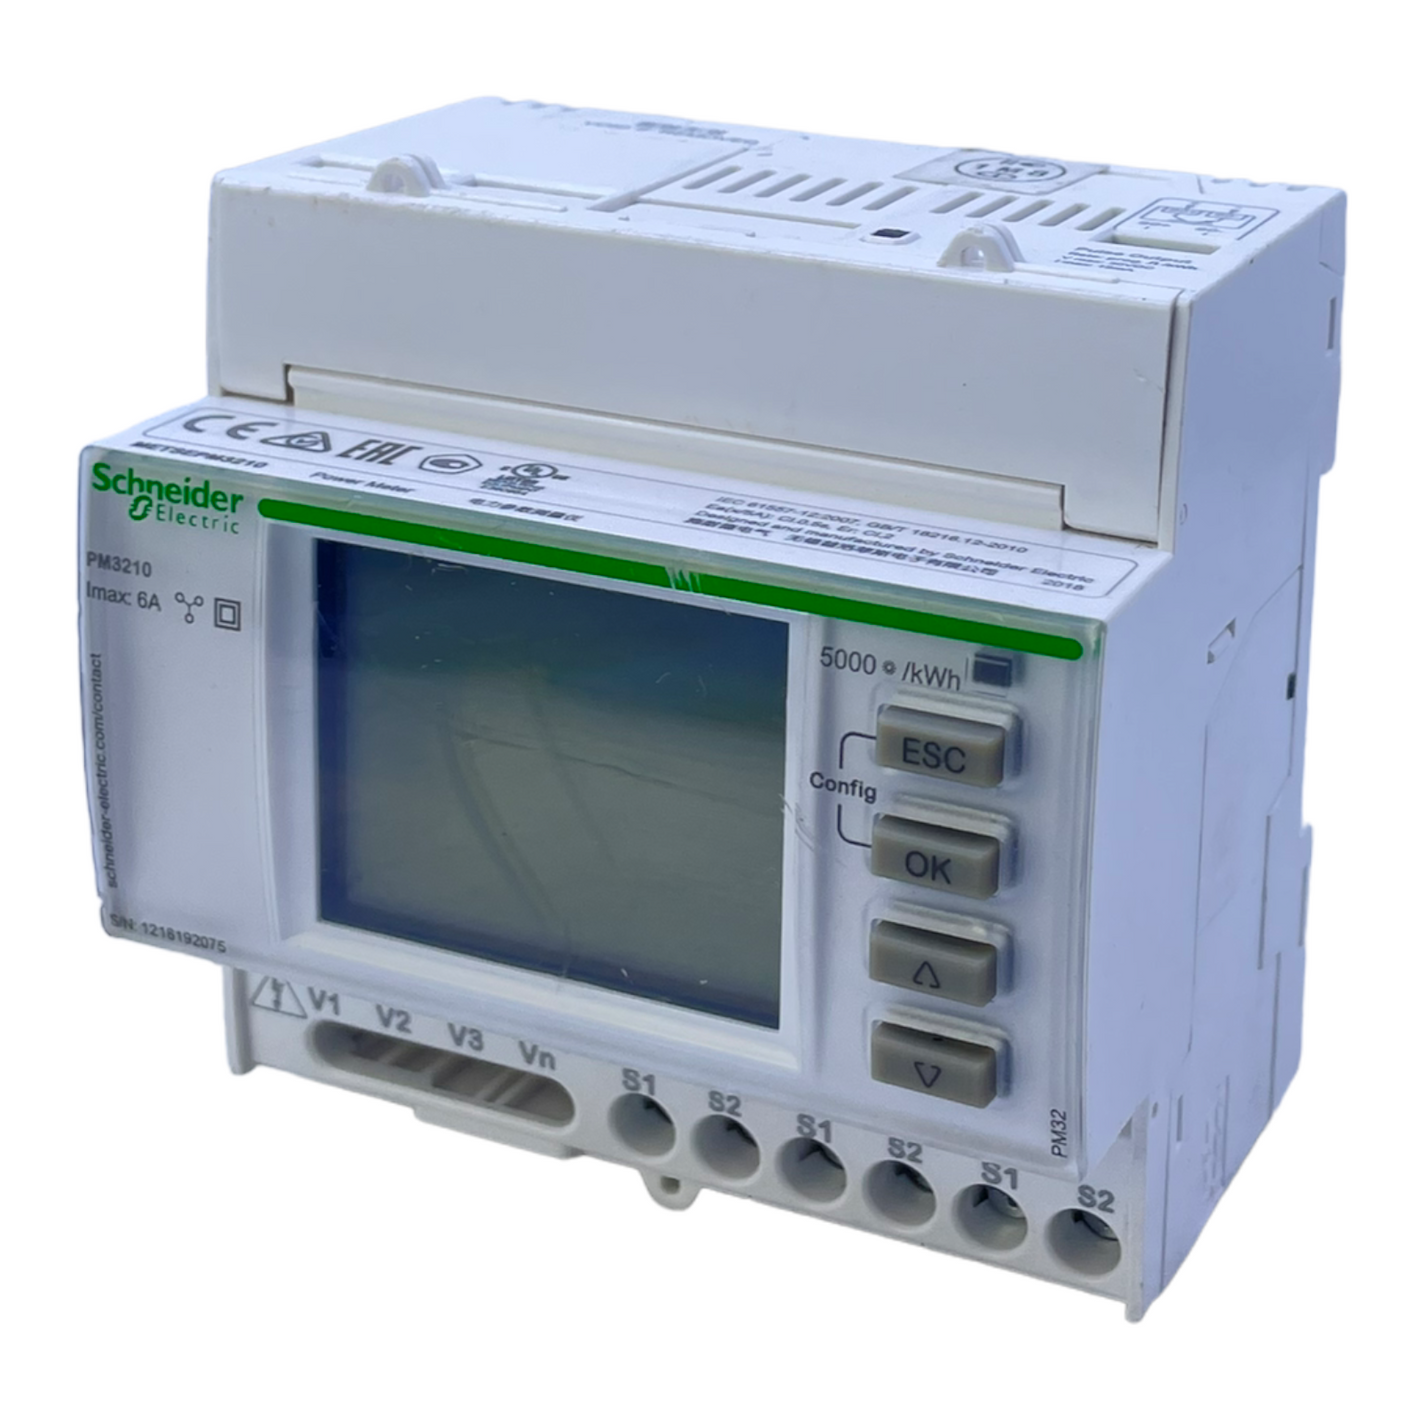 Schneider Electric PM3210 universal measuring device for industrial use 6A 